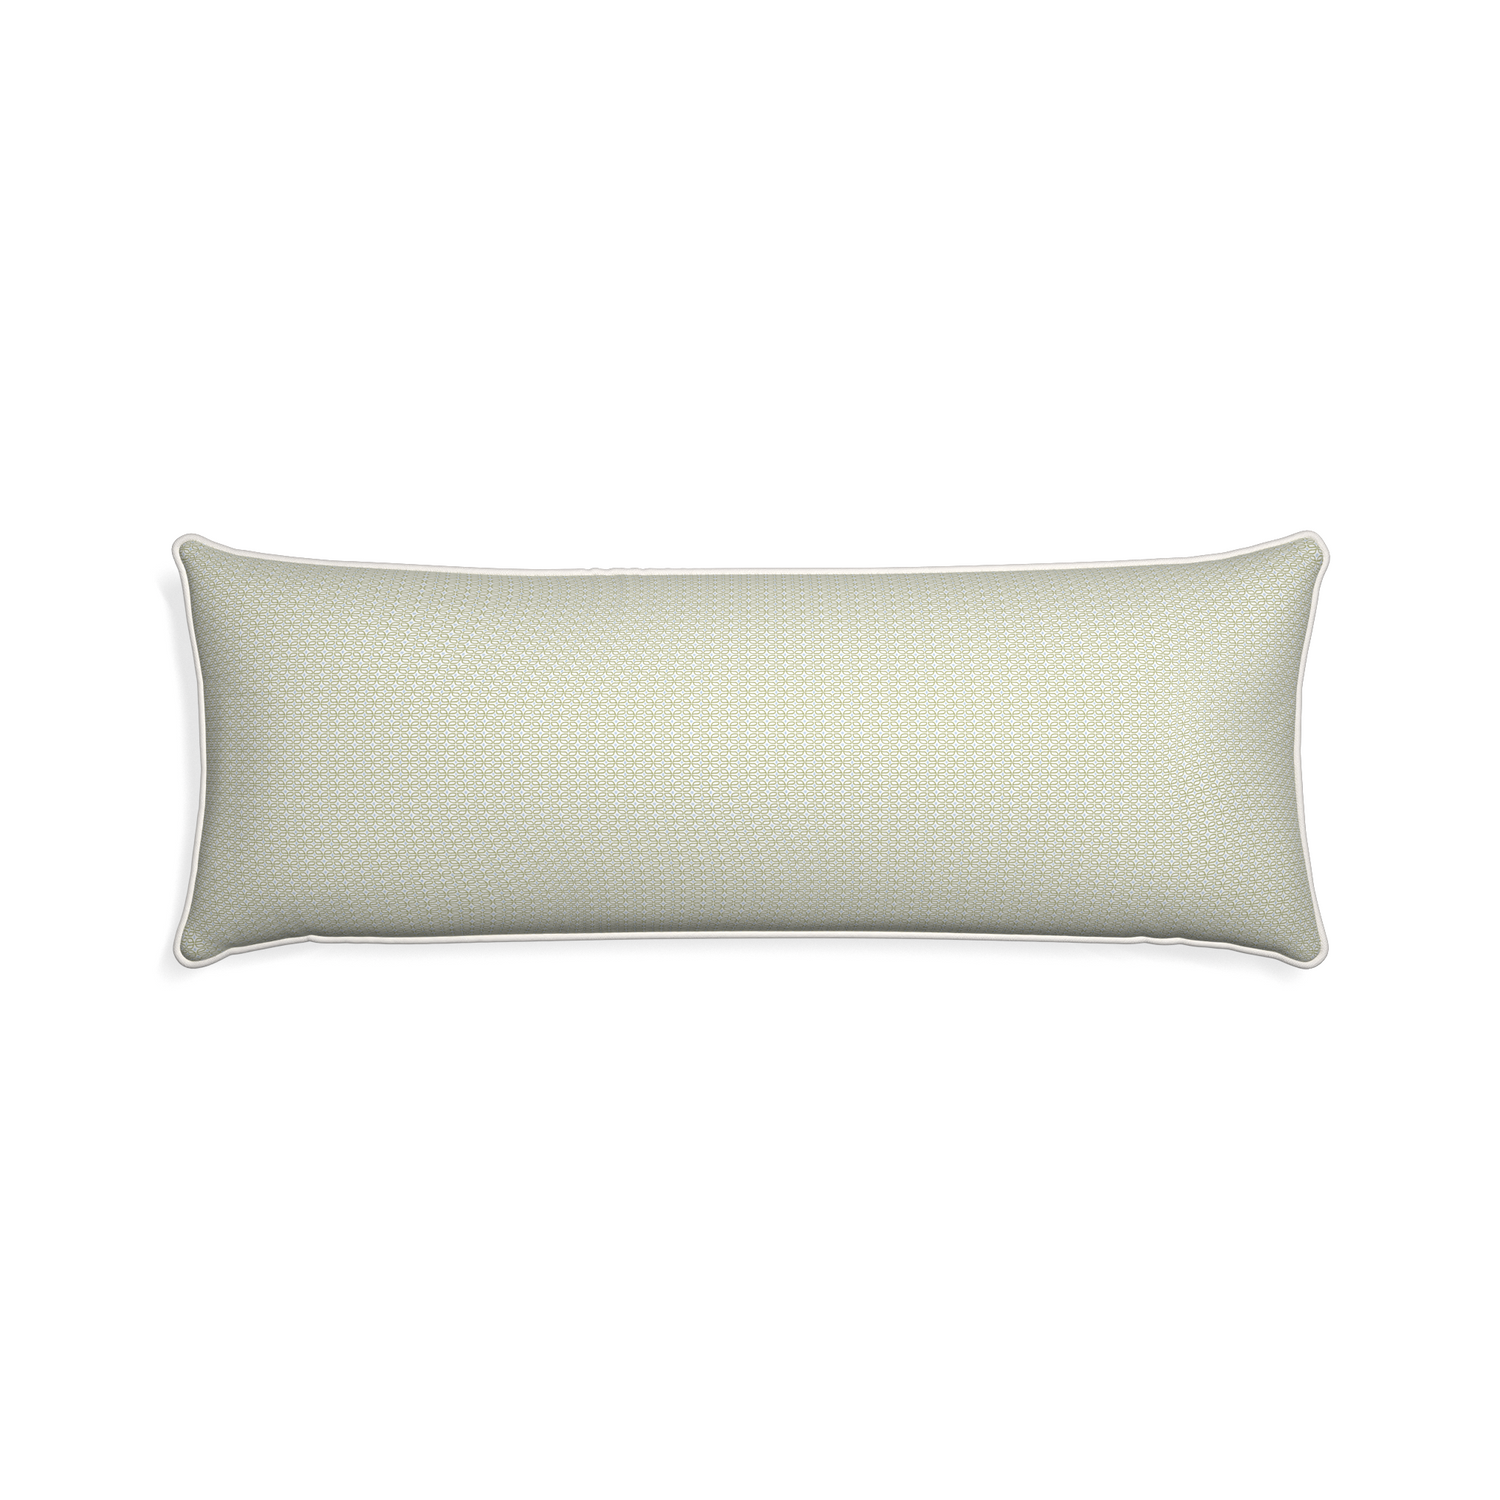 Xl-lumbar loomi moss custom moss green geometricpillow with snow piping on white background